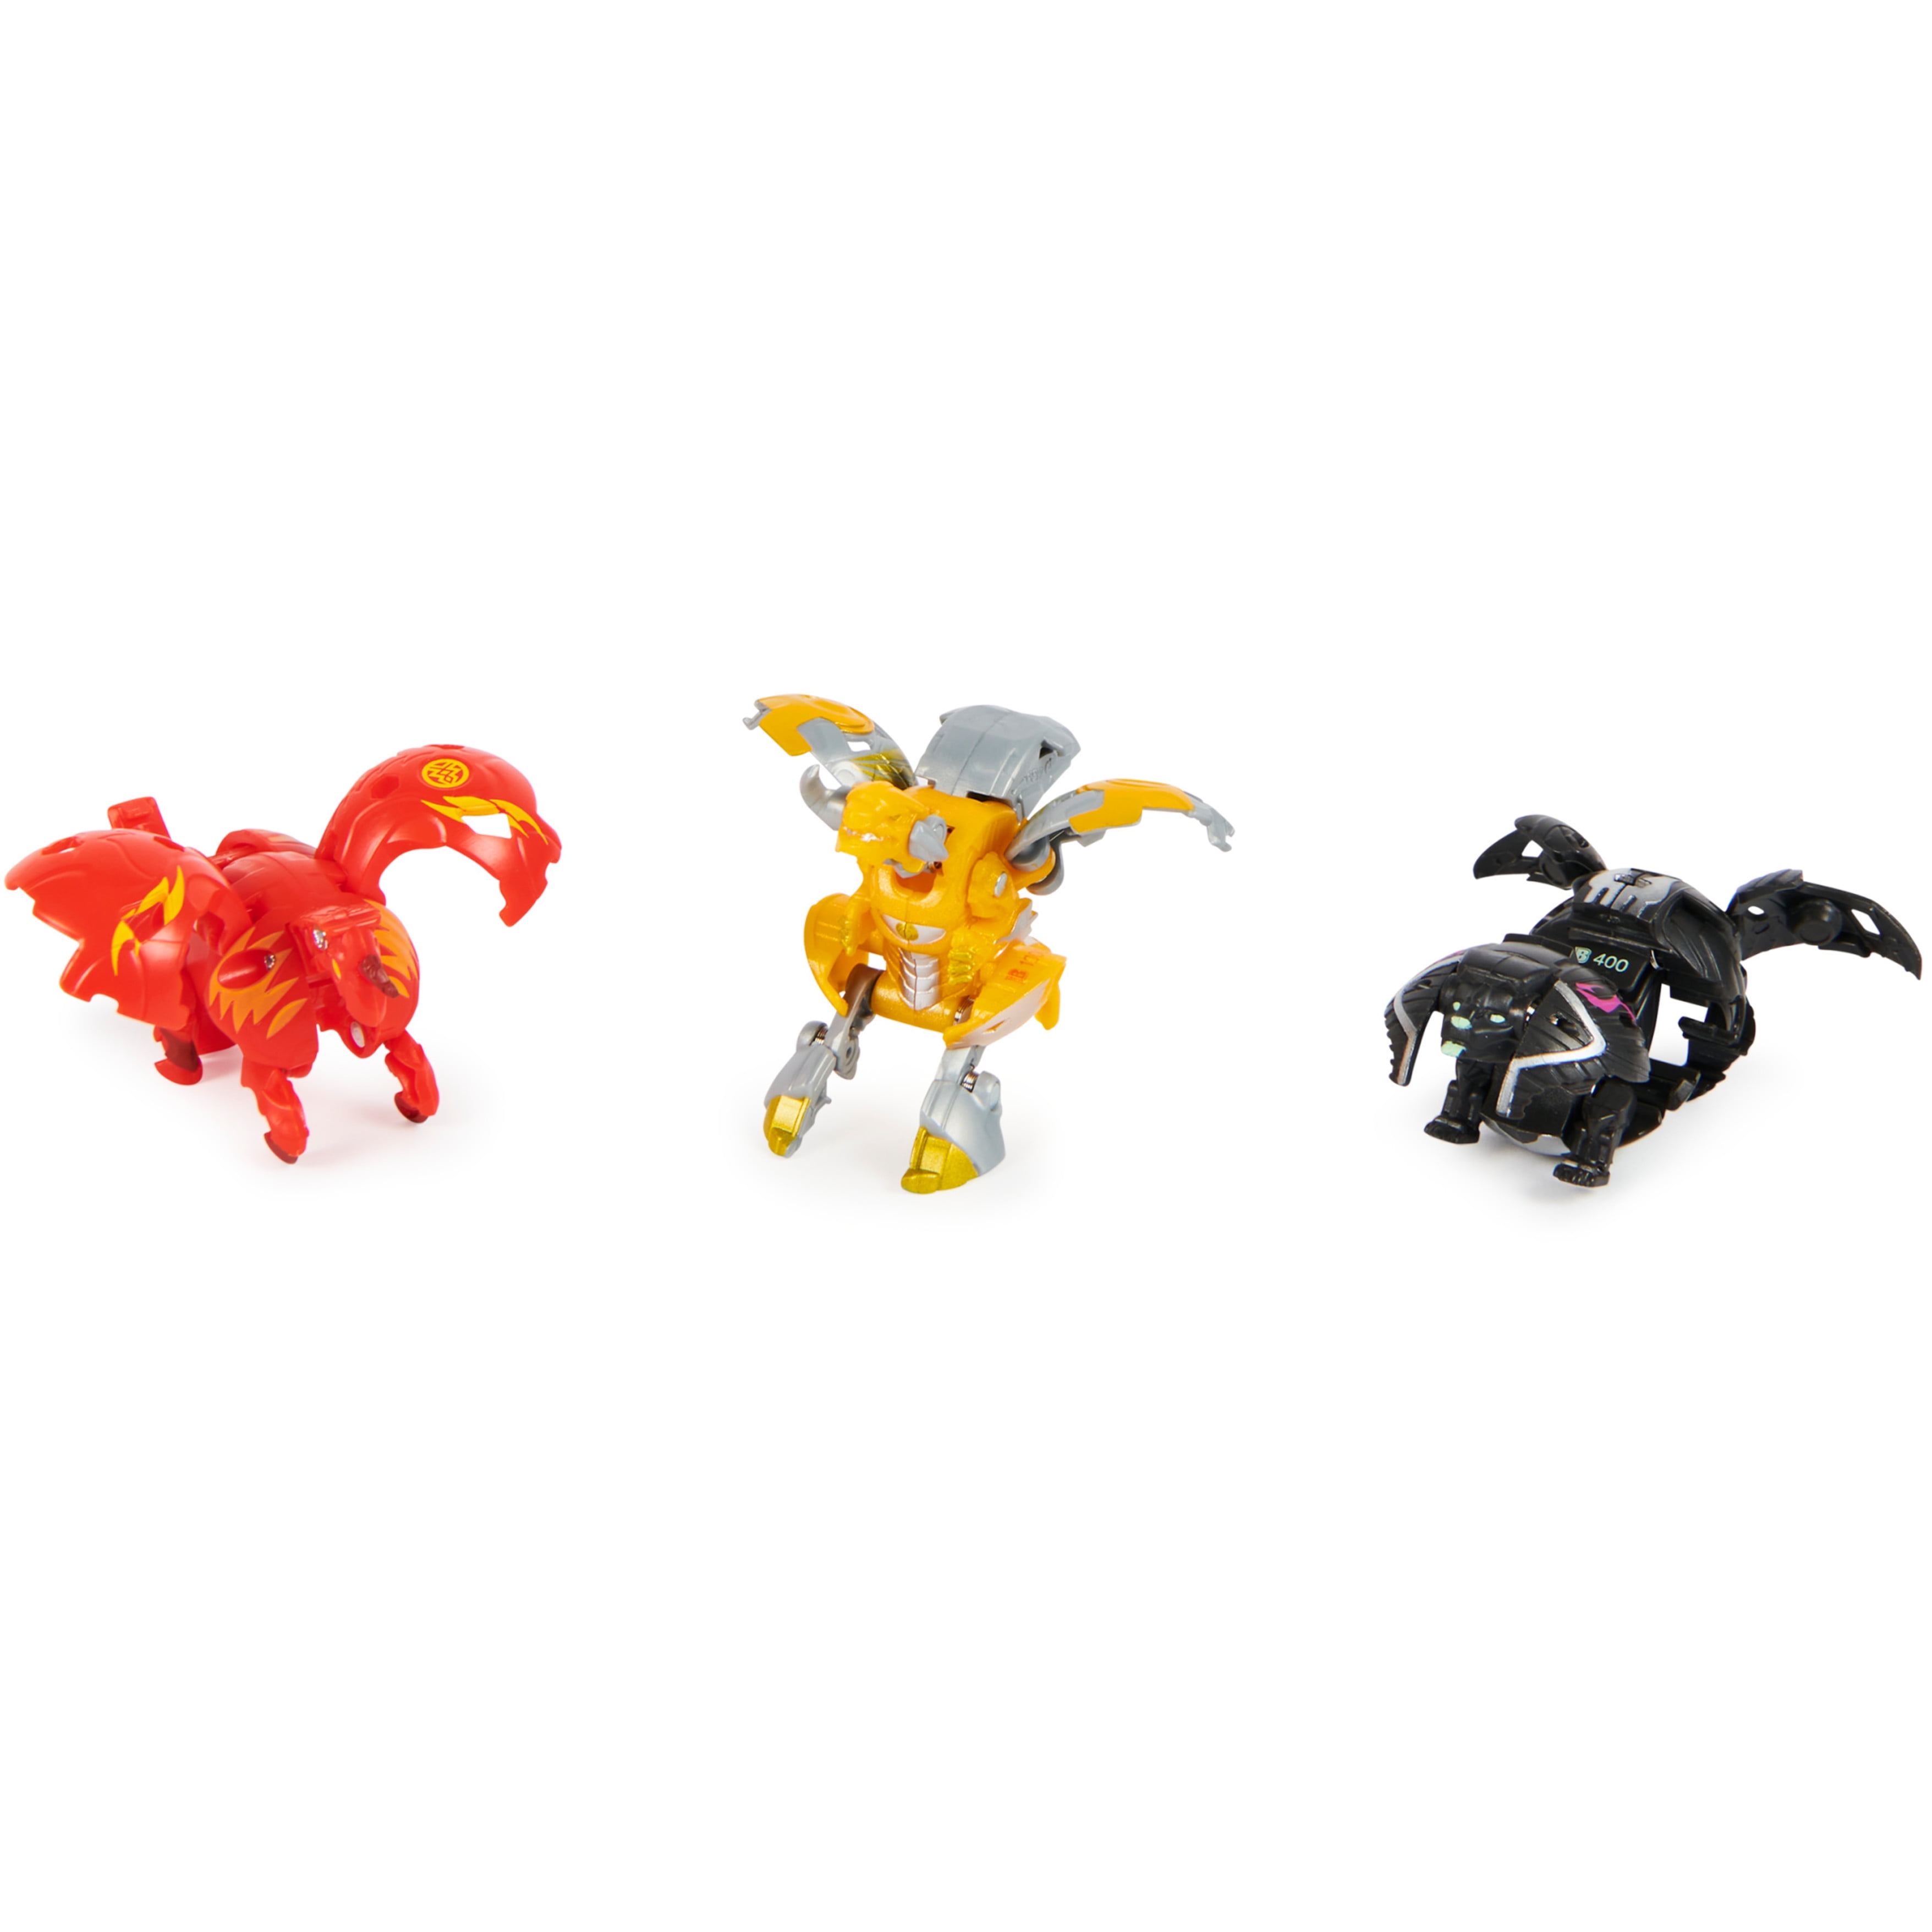 Bakugan Evolutions Starter Pack 3-Pack Throwing spinning top - Toys To Love